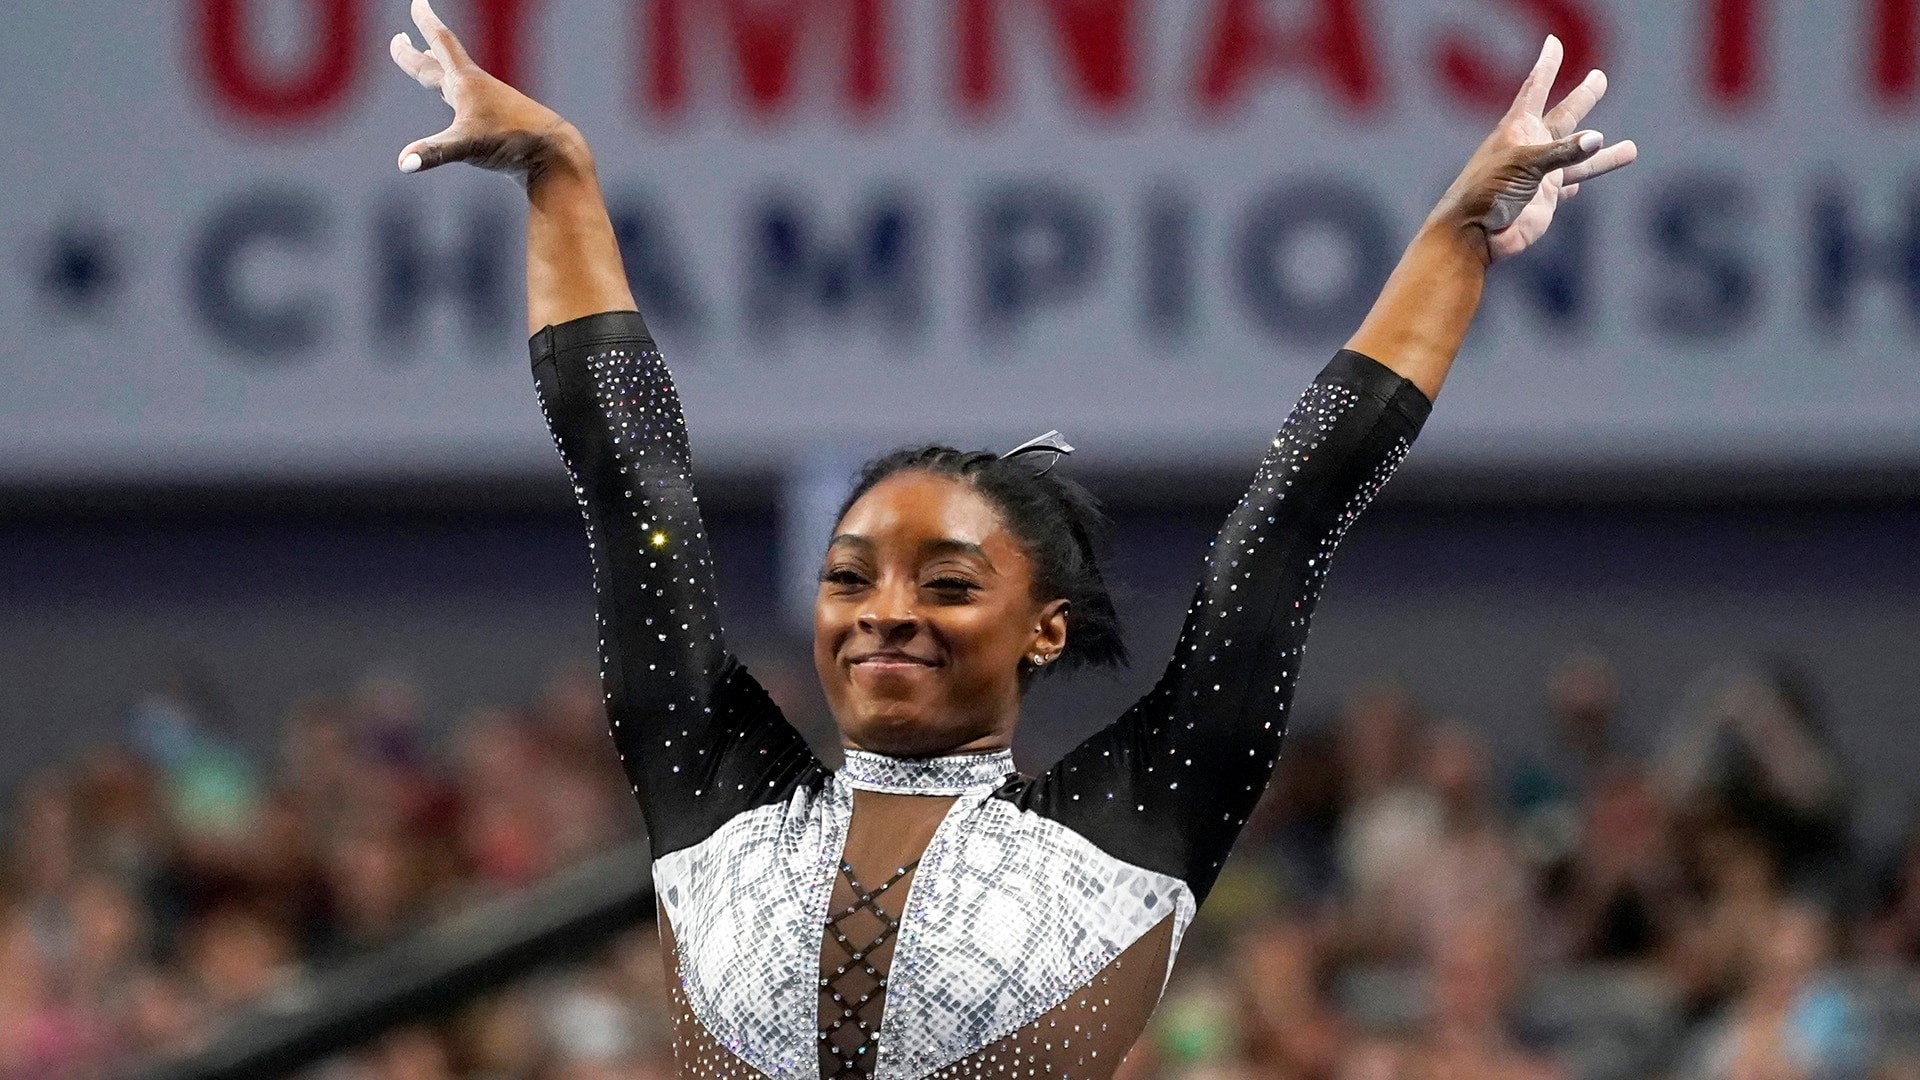 Watch TODAY Highlight Simone Biles wins her 7th national women’s all